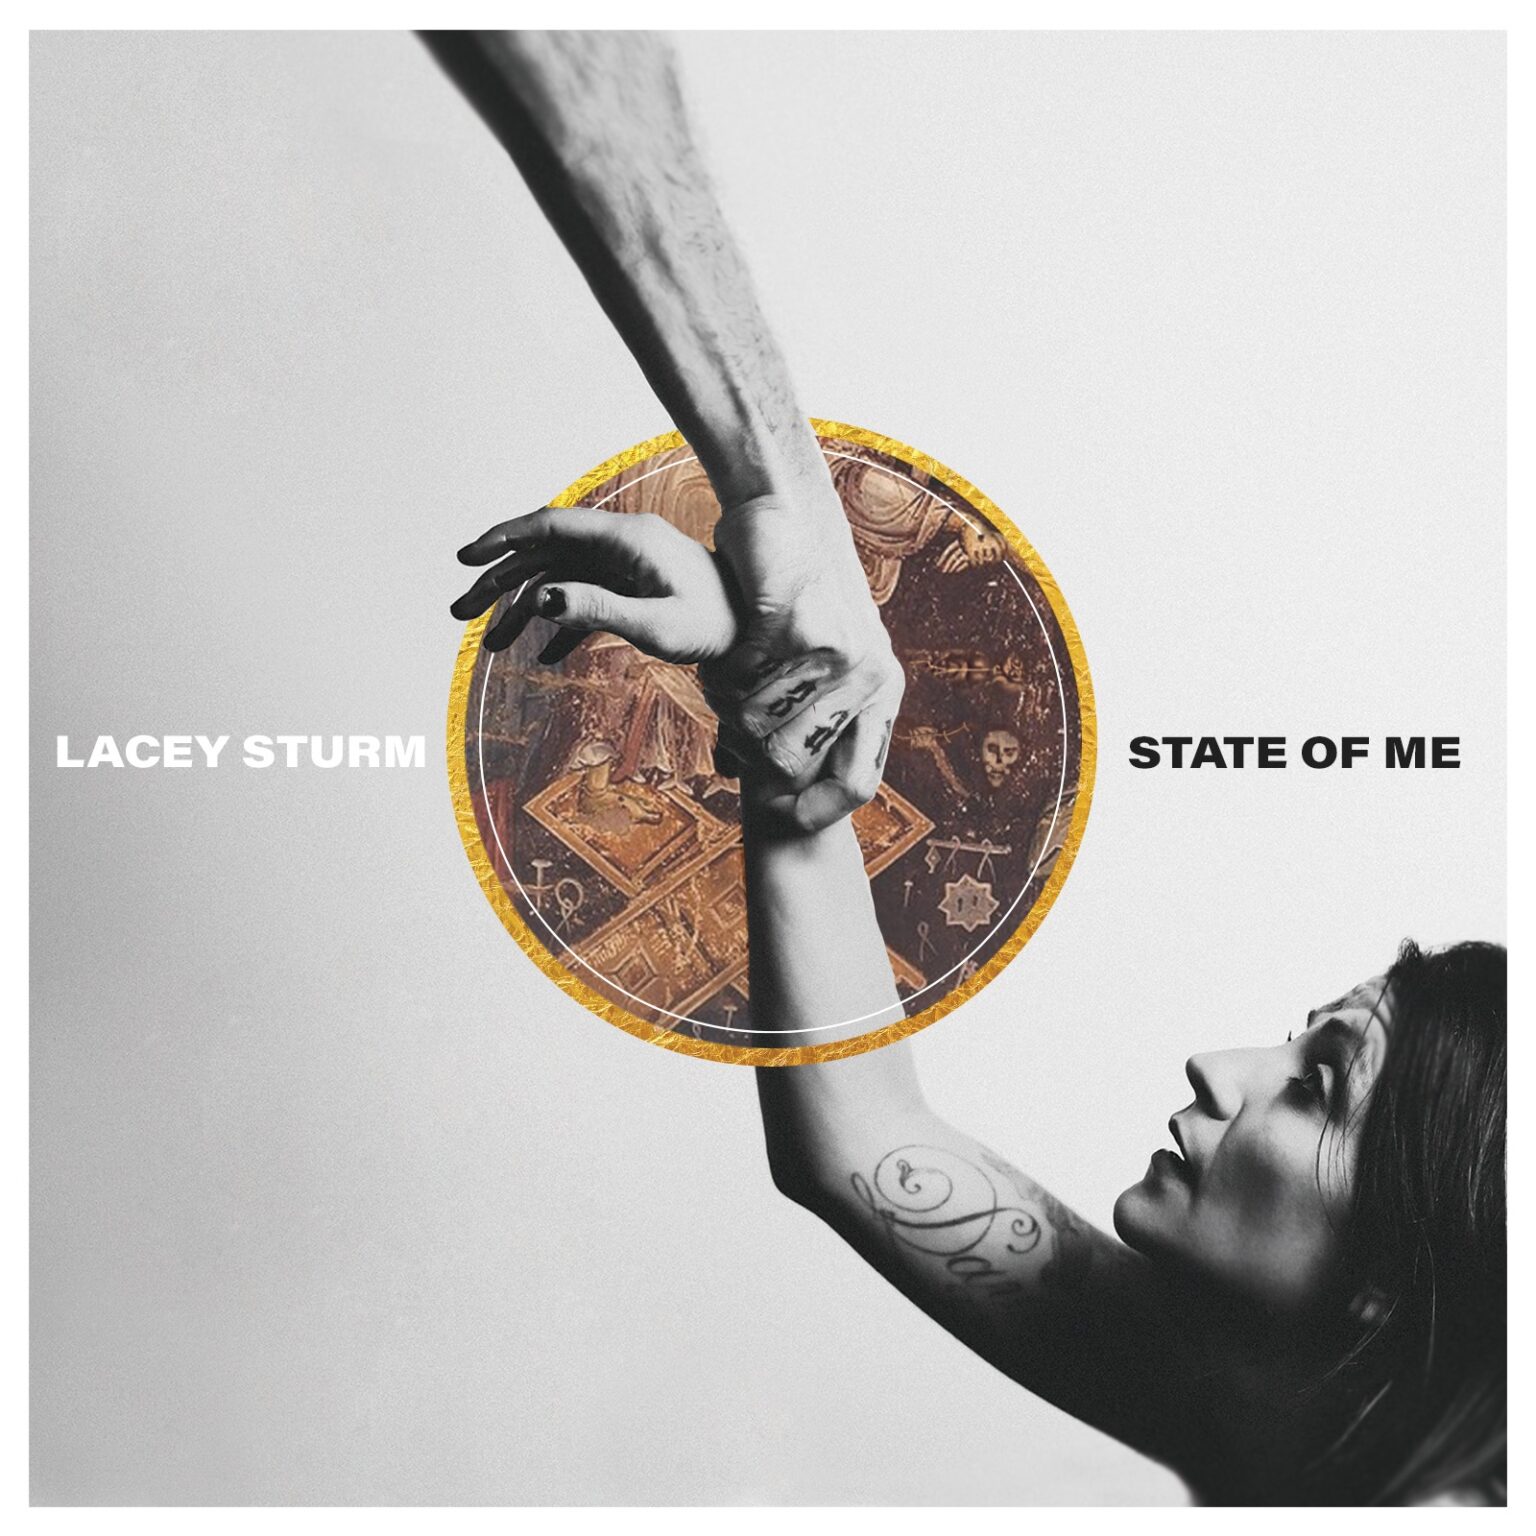 Lacey Sturm releases new single “State of Me”. All 'Bout Music AlBuM*